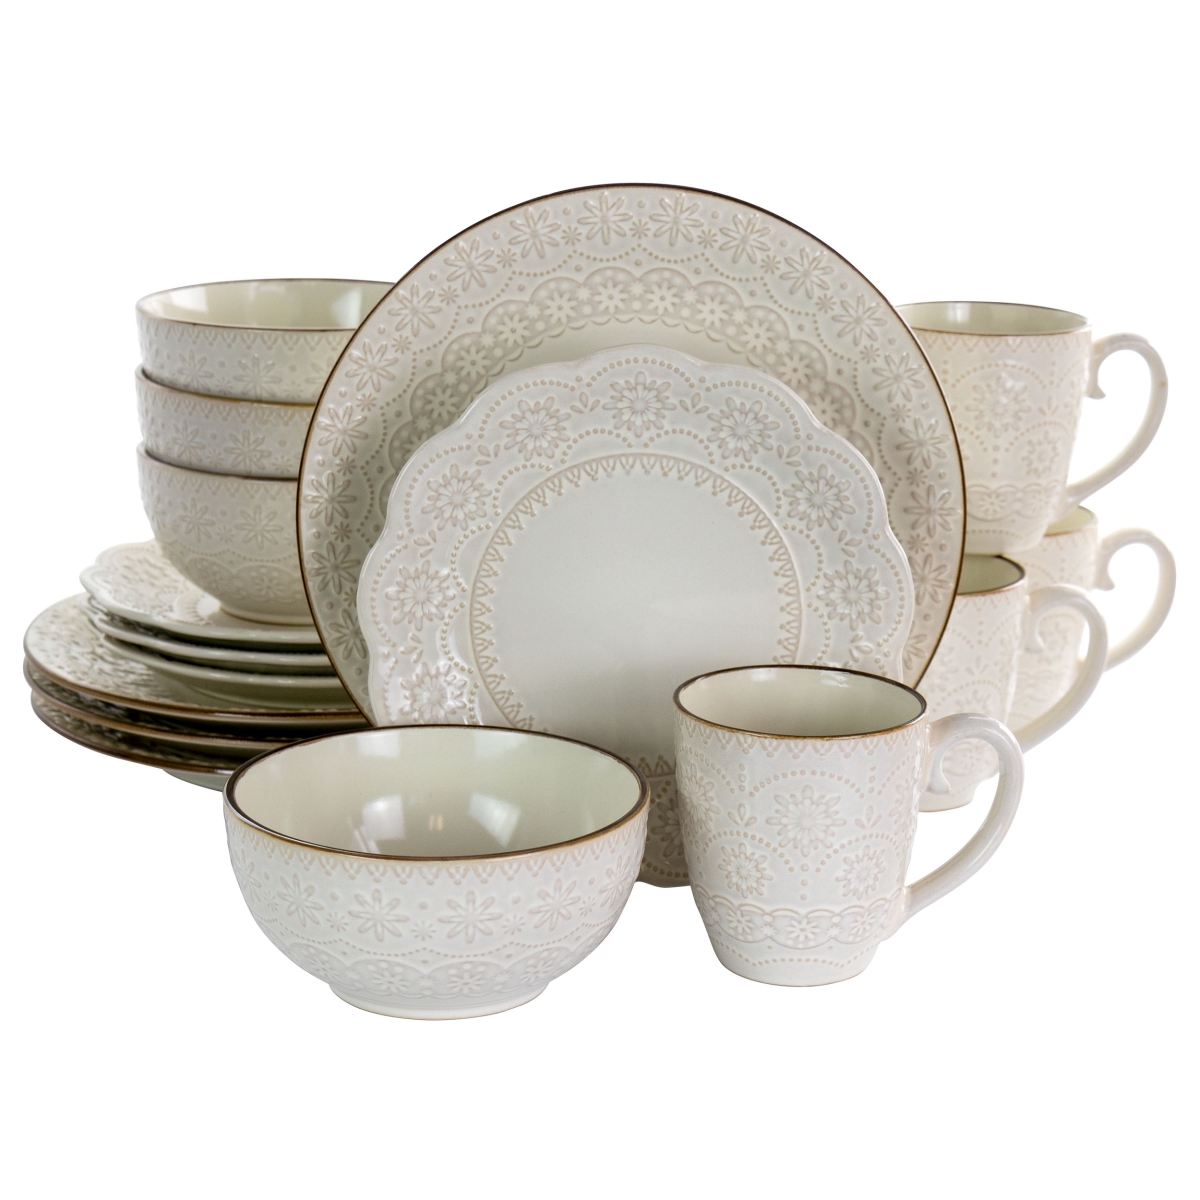 Picture of Elama EL-COUNTESS Countess Embossed Double Bowl Stoneware Dinnerware Set in Ivory - 16 Piece